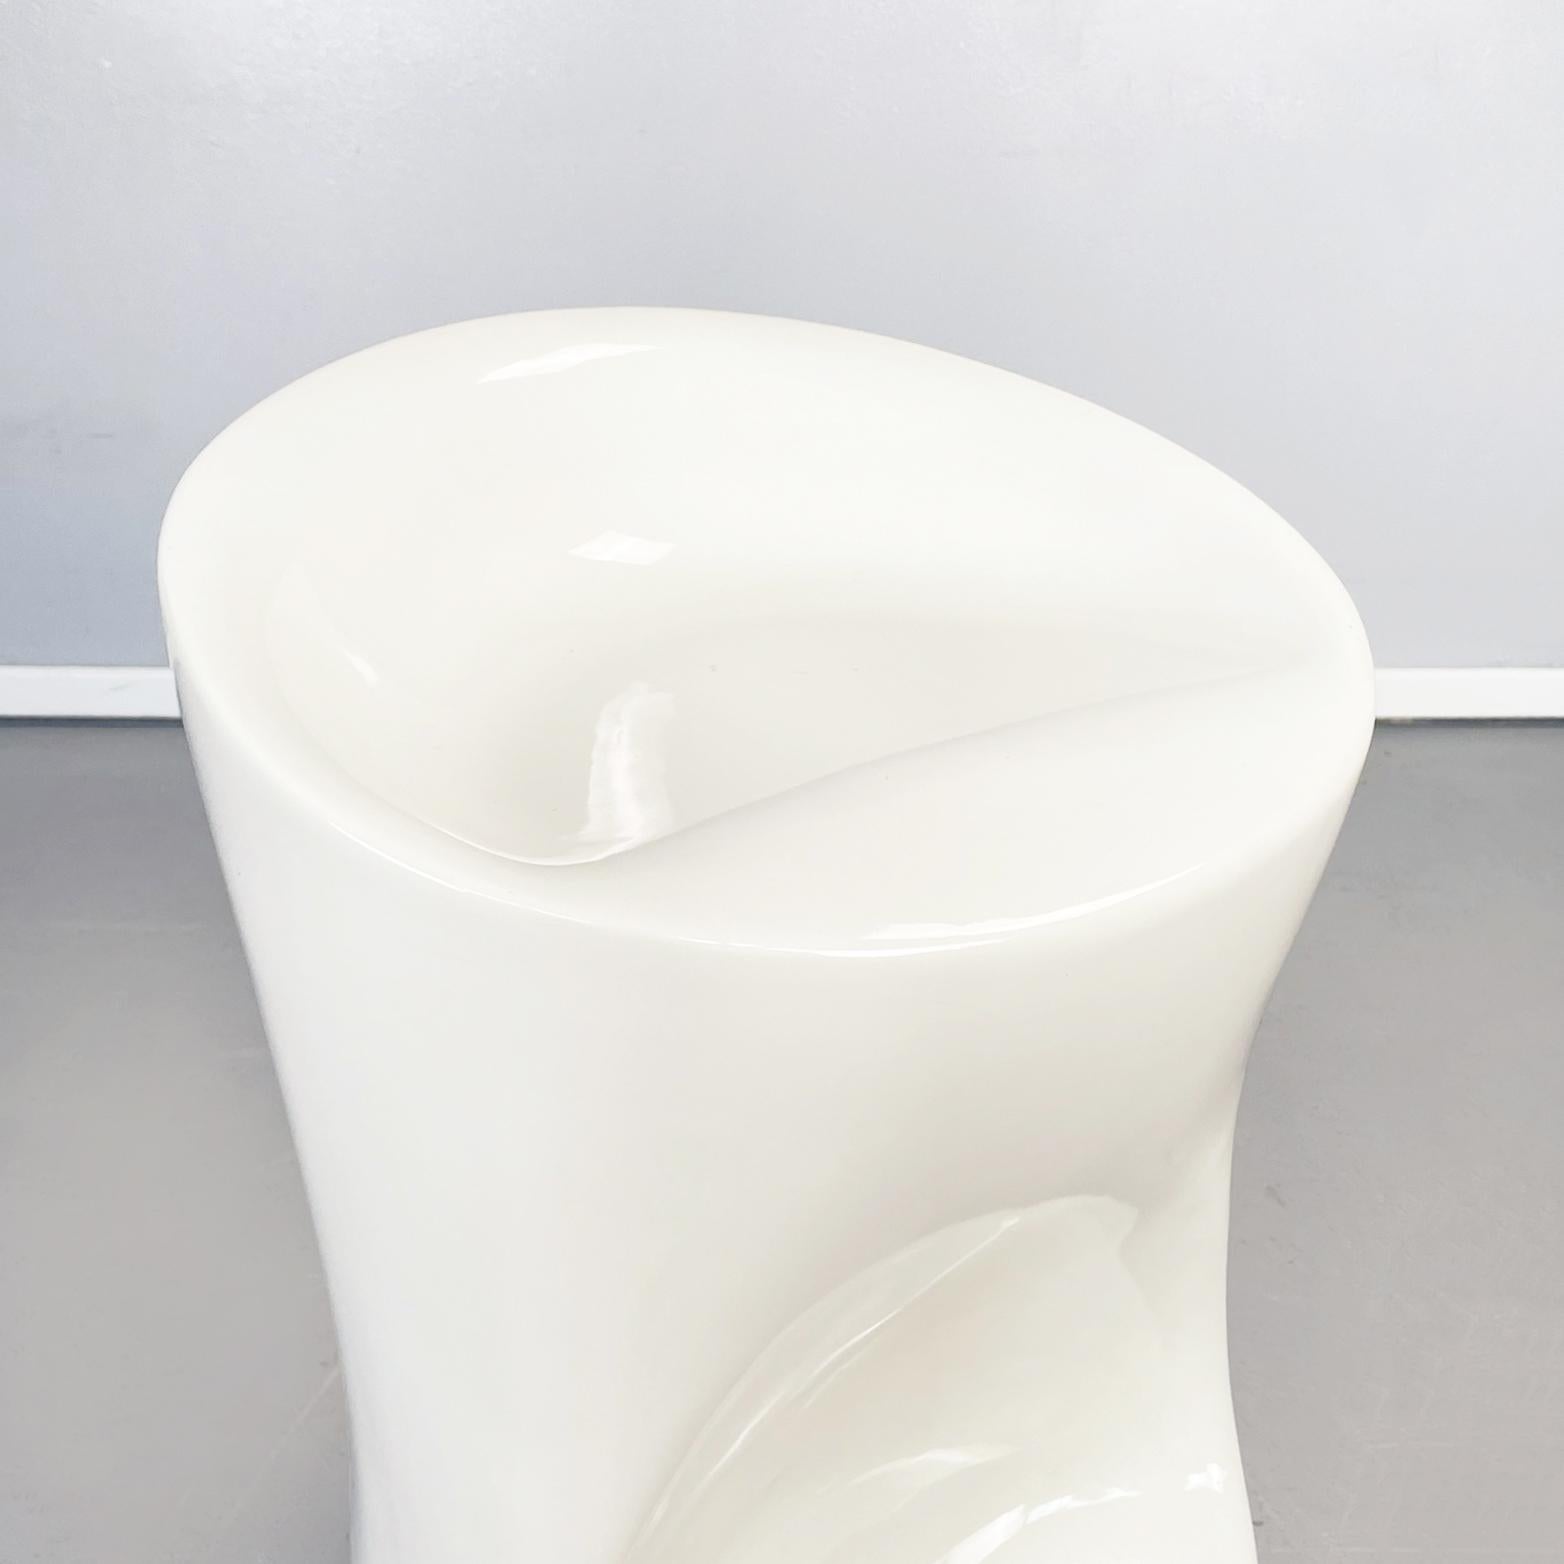 Italian Space Age Modern Stool with Footrest in White Plastic, 2000s For Sale 3